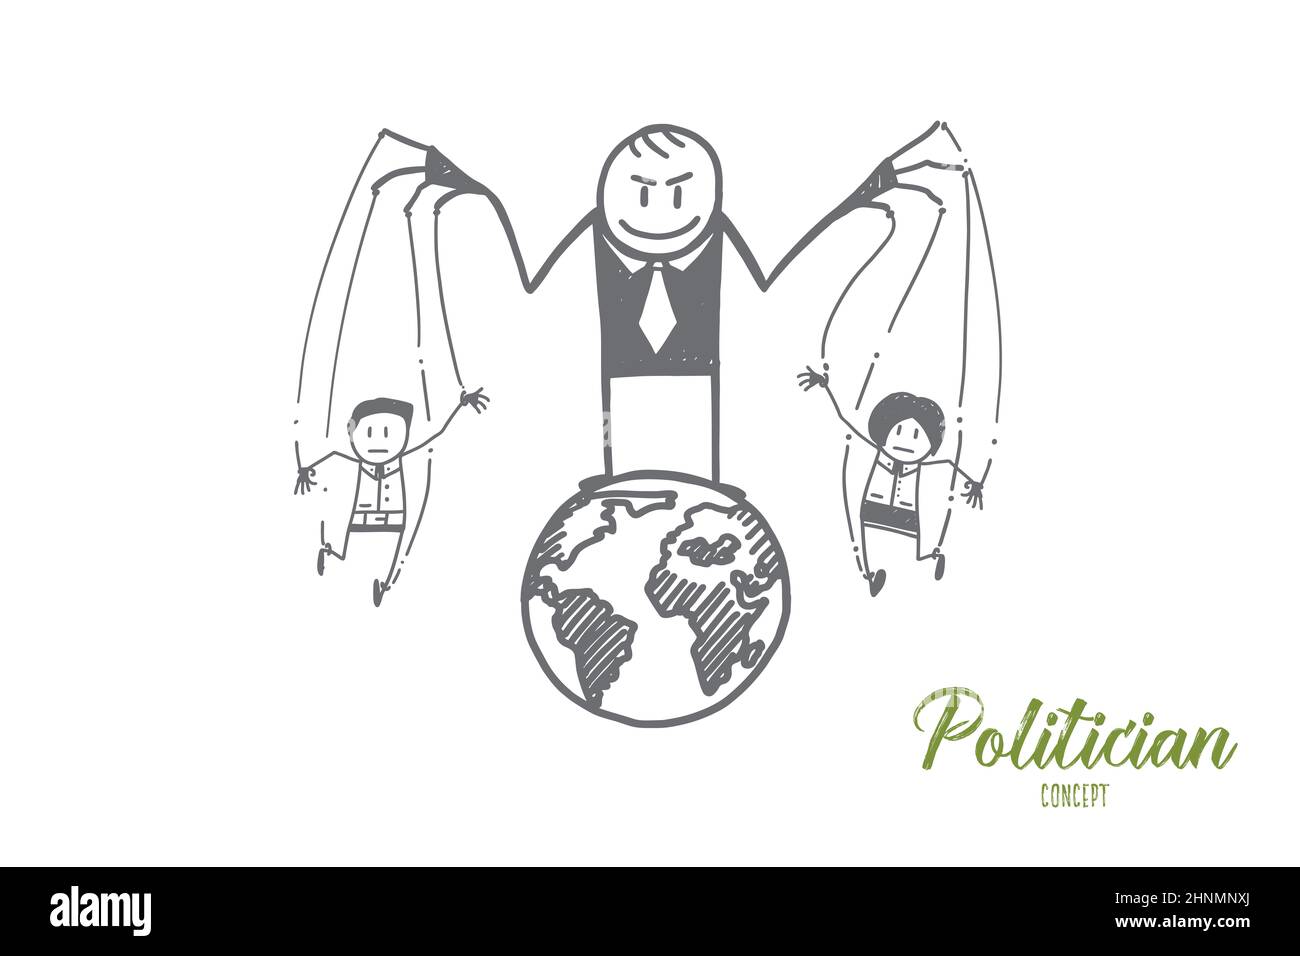 Vector hand drawn Politician concept sketch. Politician standing on globe and playing with small people as puppets Stock Photo